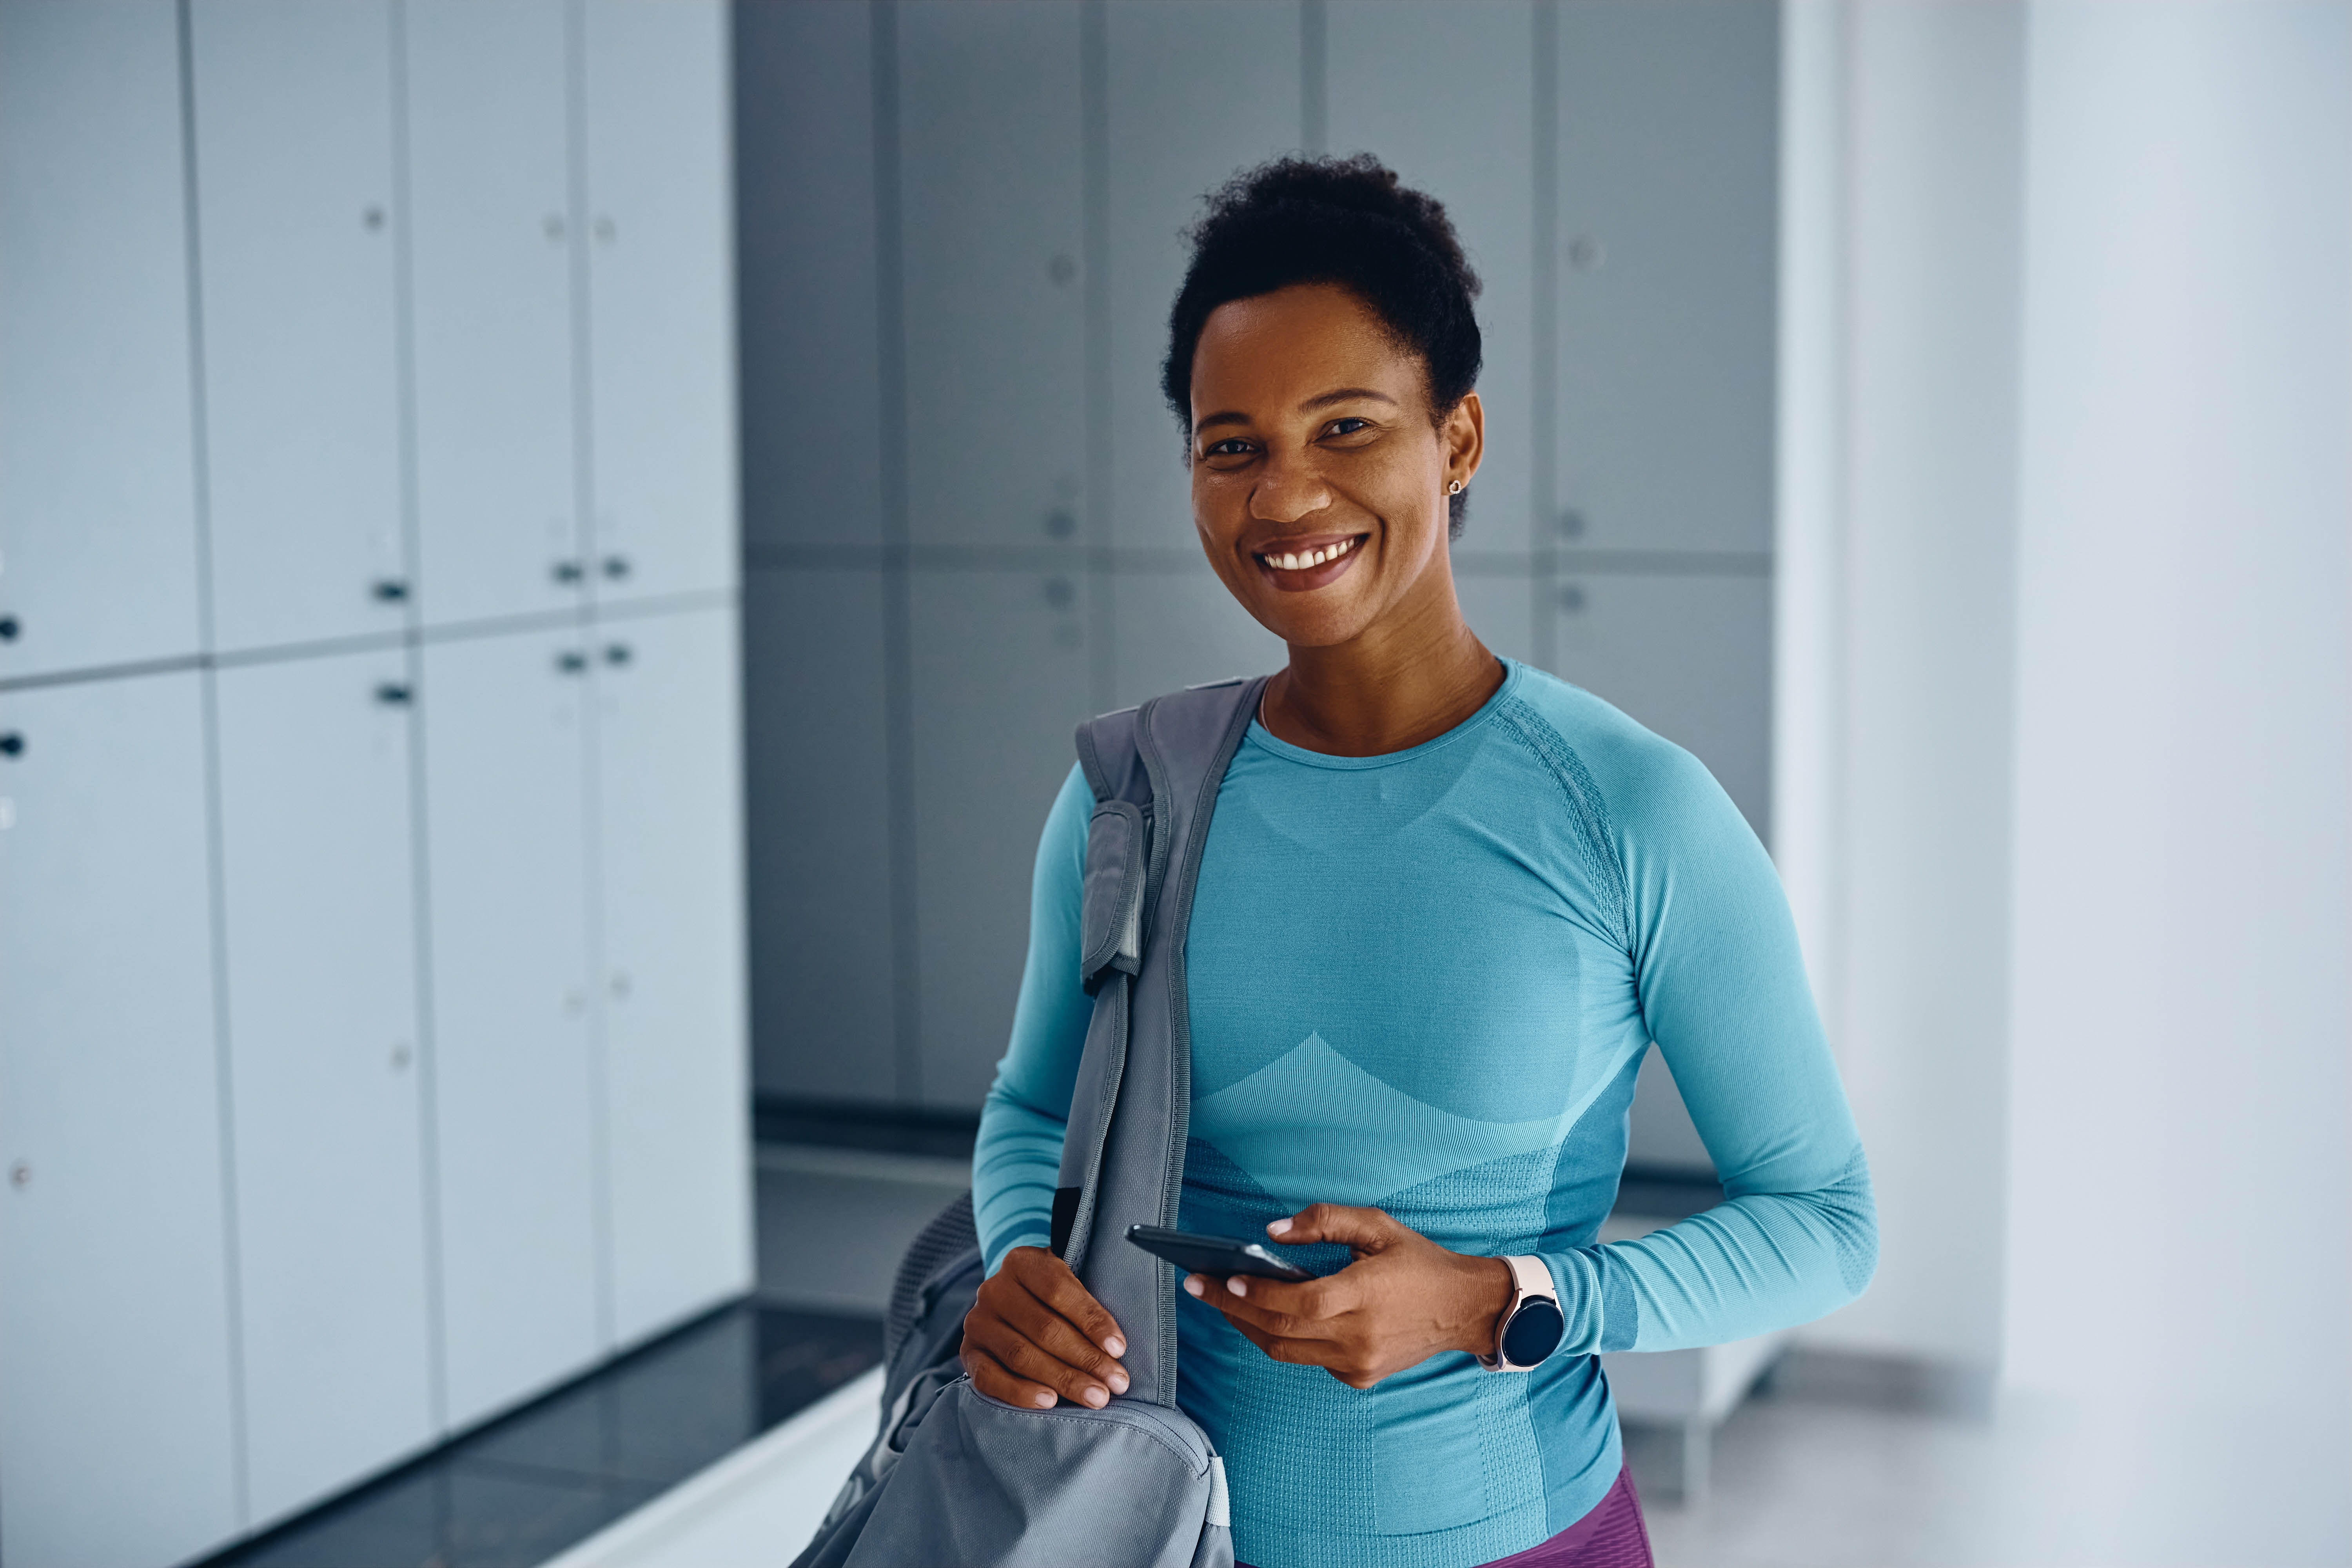 Middle aged woman standing and smiling, with her athletic gear in a bag over her shoulder, standing in a gym locker room